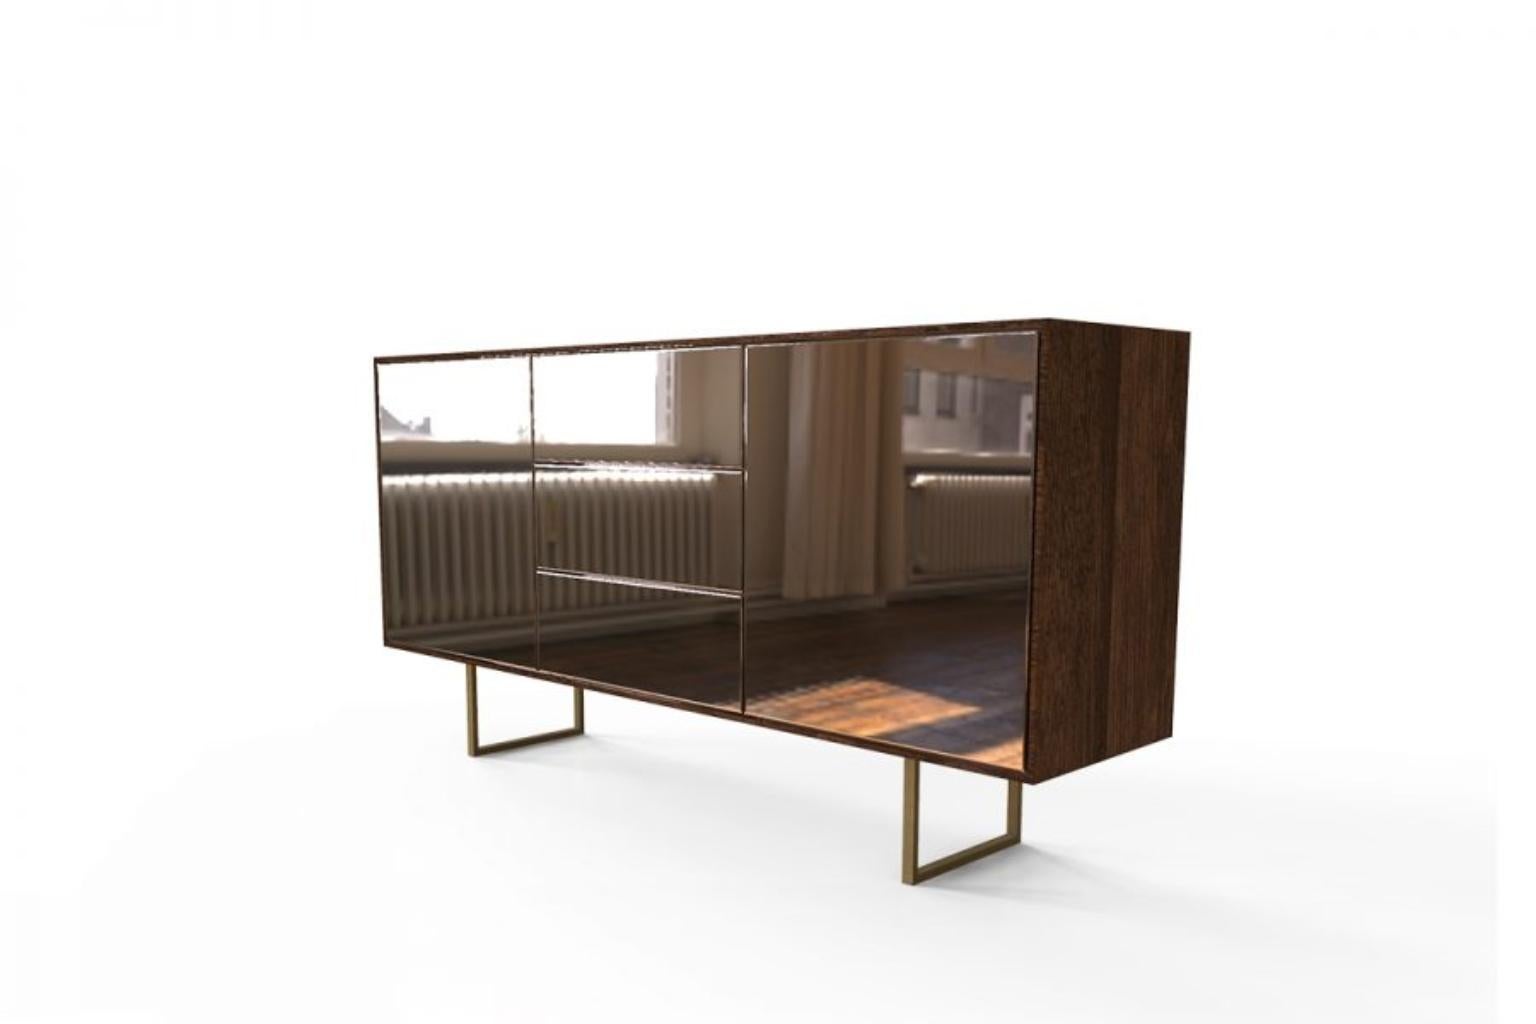 Minimalist Kafe Bronze Mirror Sideboard by Caffe Latte

A Minimalist Kafe Bronze Mirror Sideboard by Caffe Latte, where the clean lines are the main character. Its modern design mixed with oak wood with walnut stain varnish matte, bronze mirror body